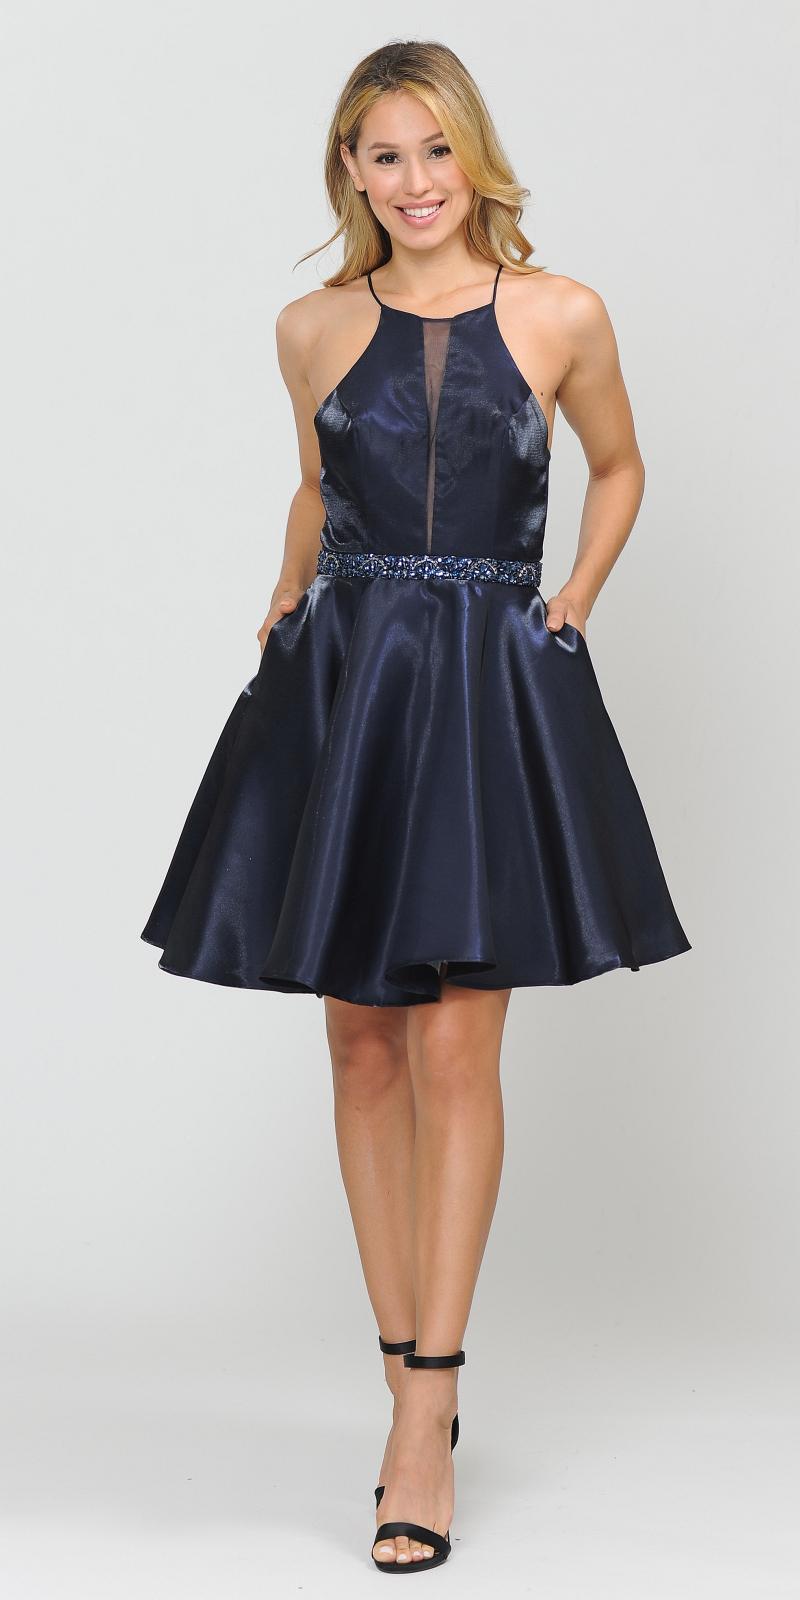 Poly USA 8236 Halter with Pockets Short Homecoming Dress Navy Blue